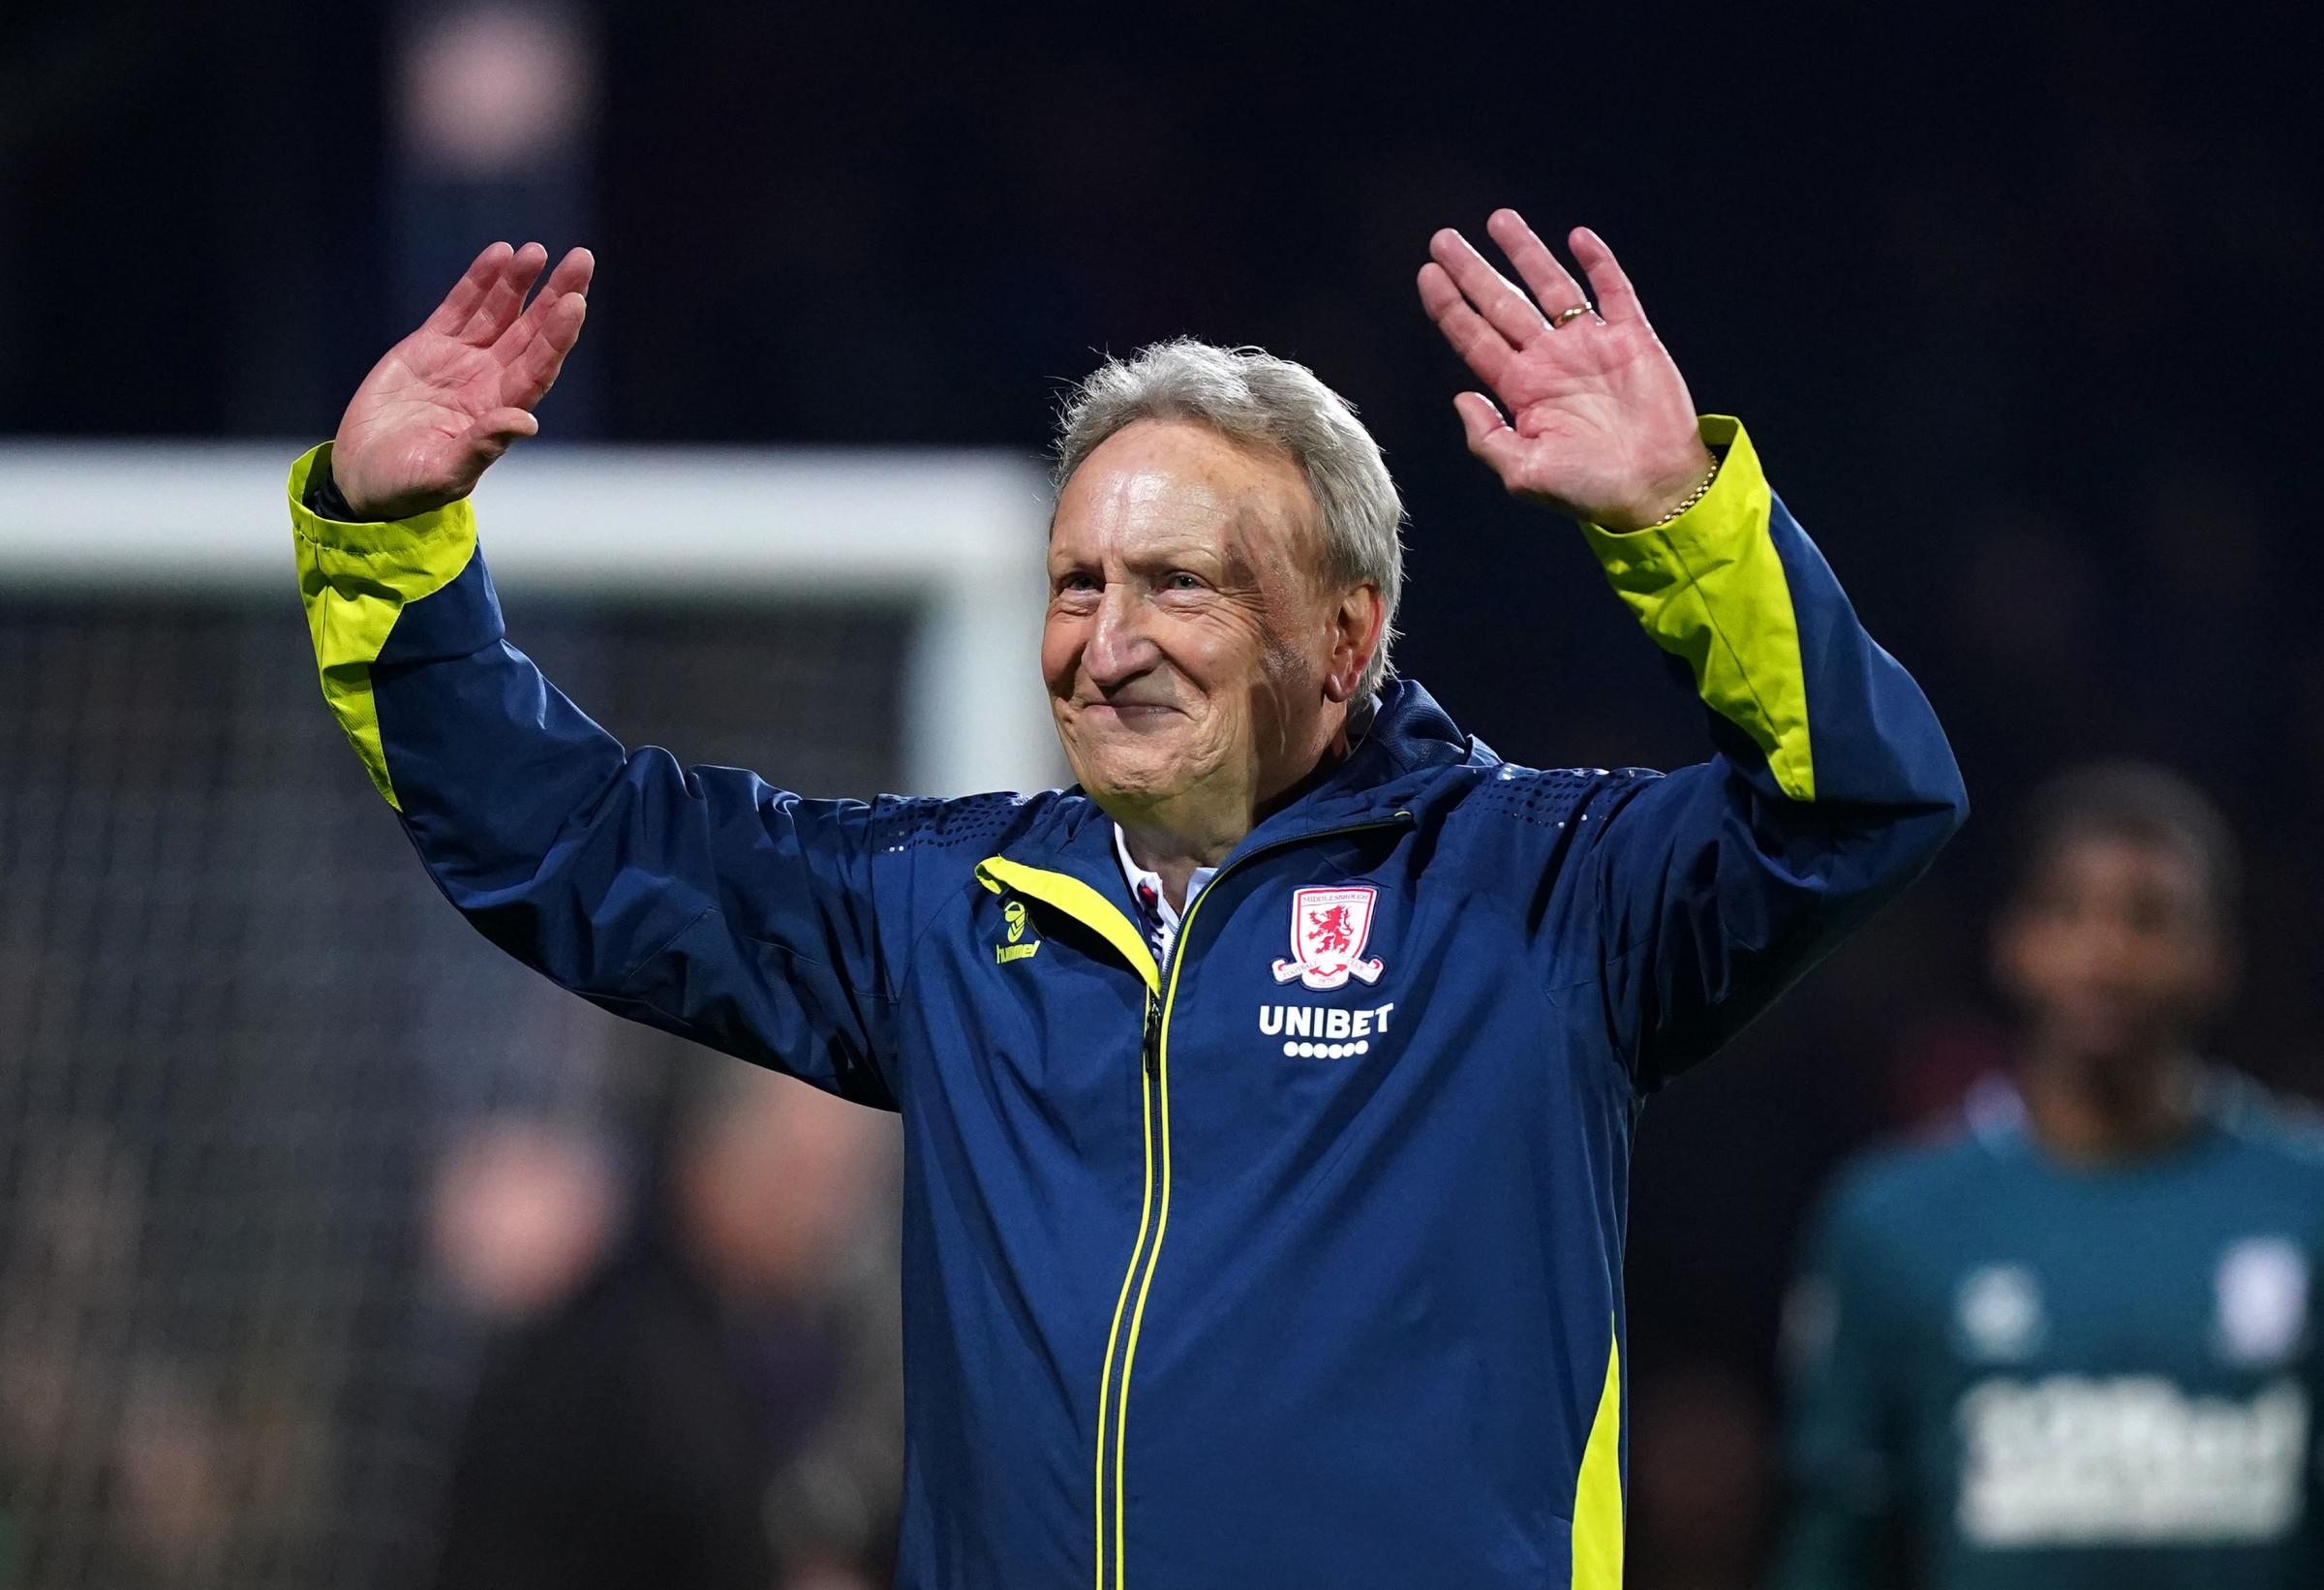 Neil Warnock says he felt a lack of support from Boro regarding recruitment